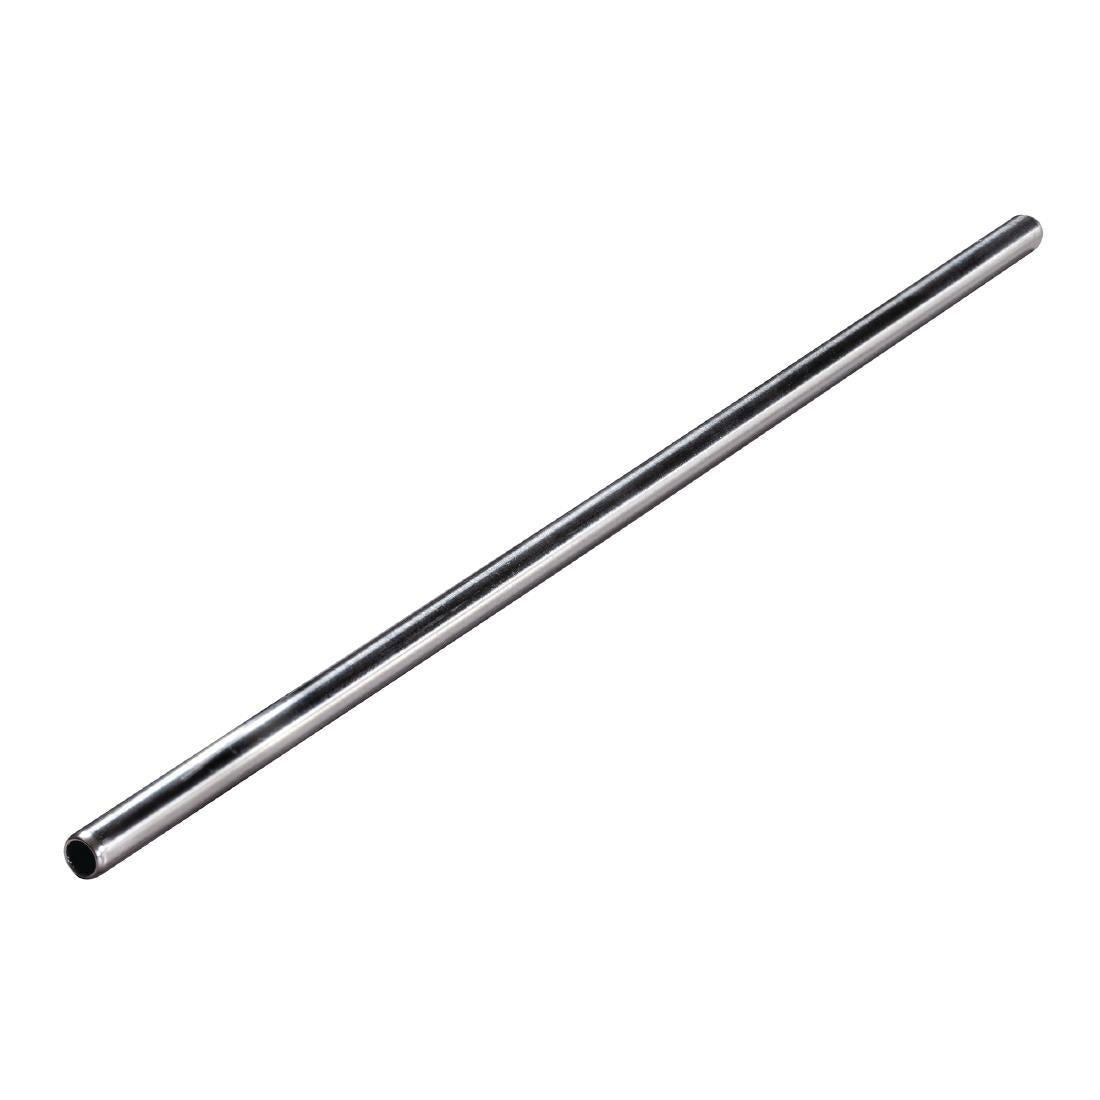 CW490 Beaumont Stainless Steel Metal Straws 8.5" (Pack of 25)